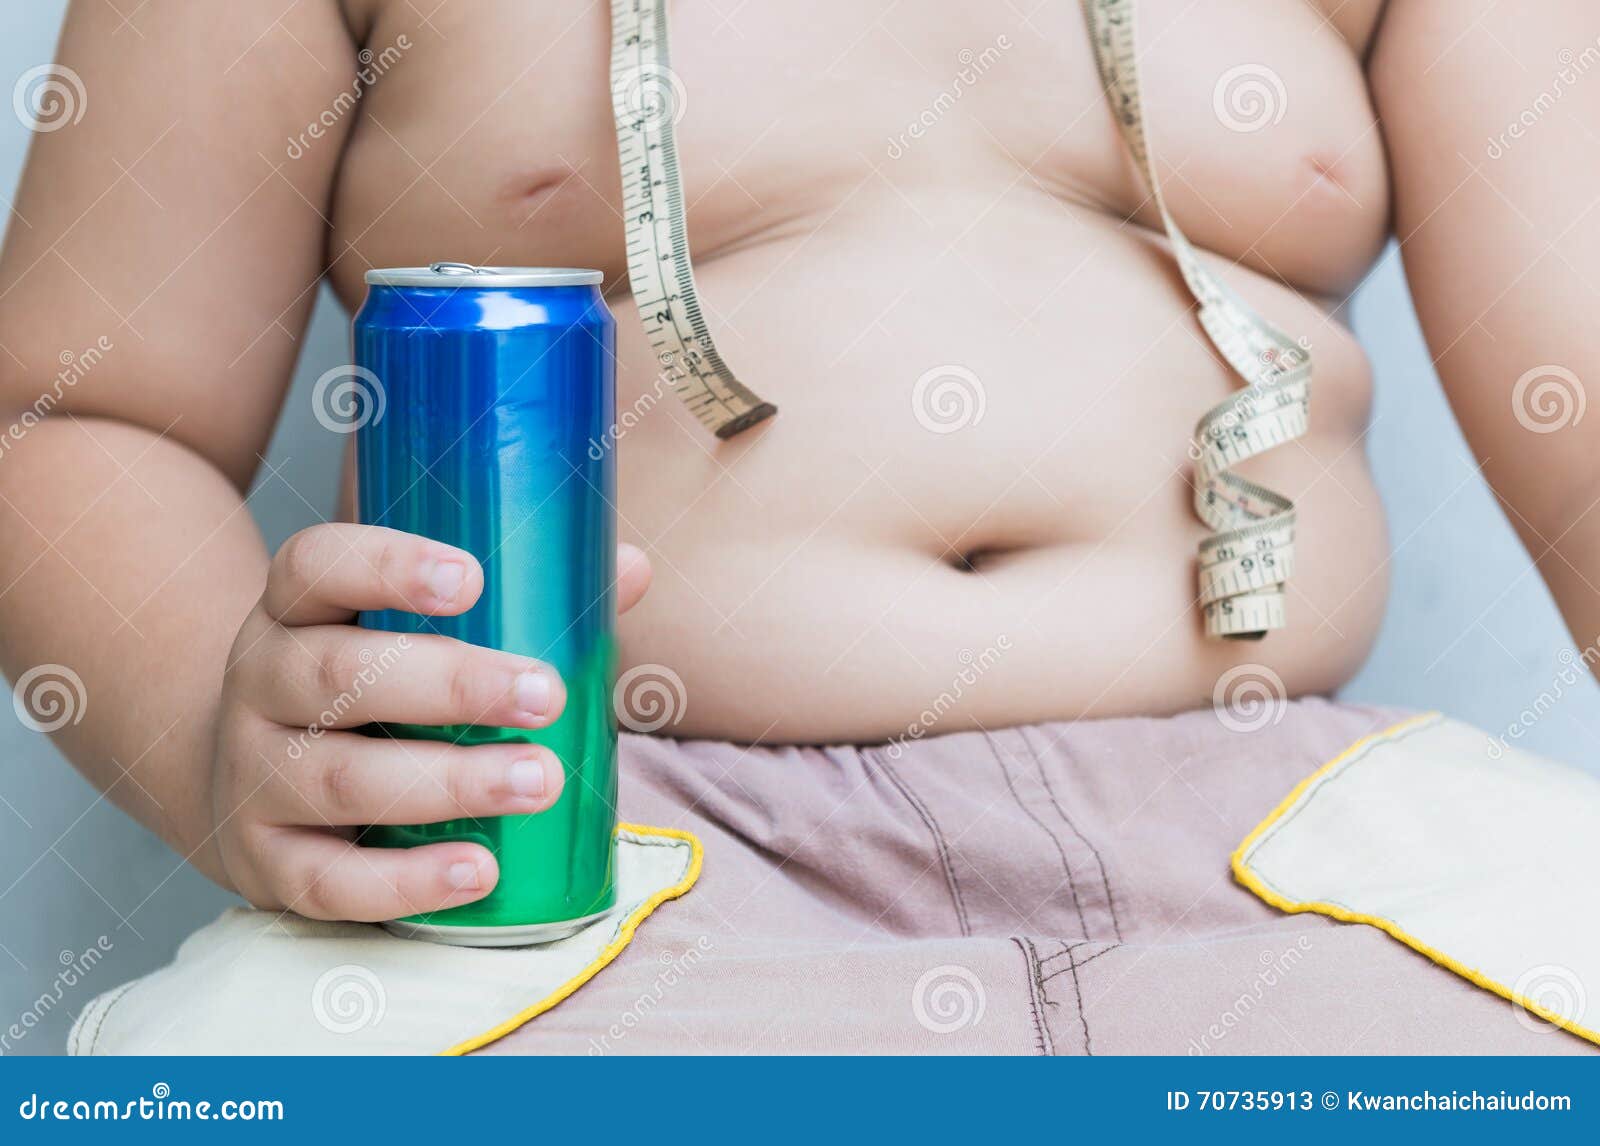 Diet. Obese Fat Boy Holding Soft Drink Can. Stock Image - Image of